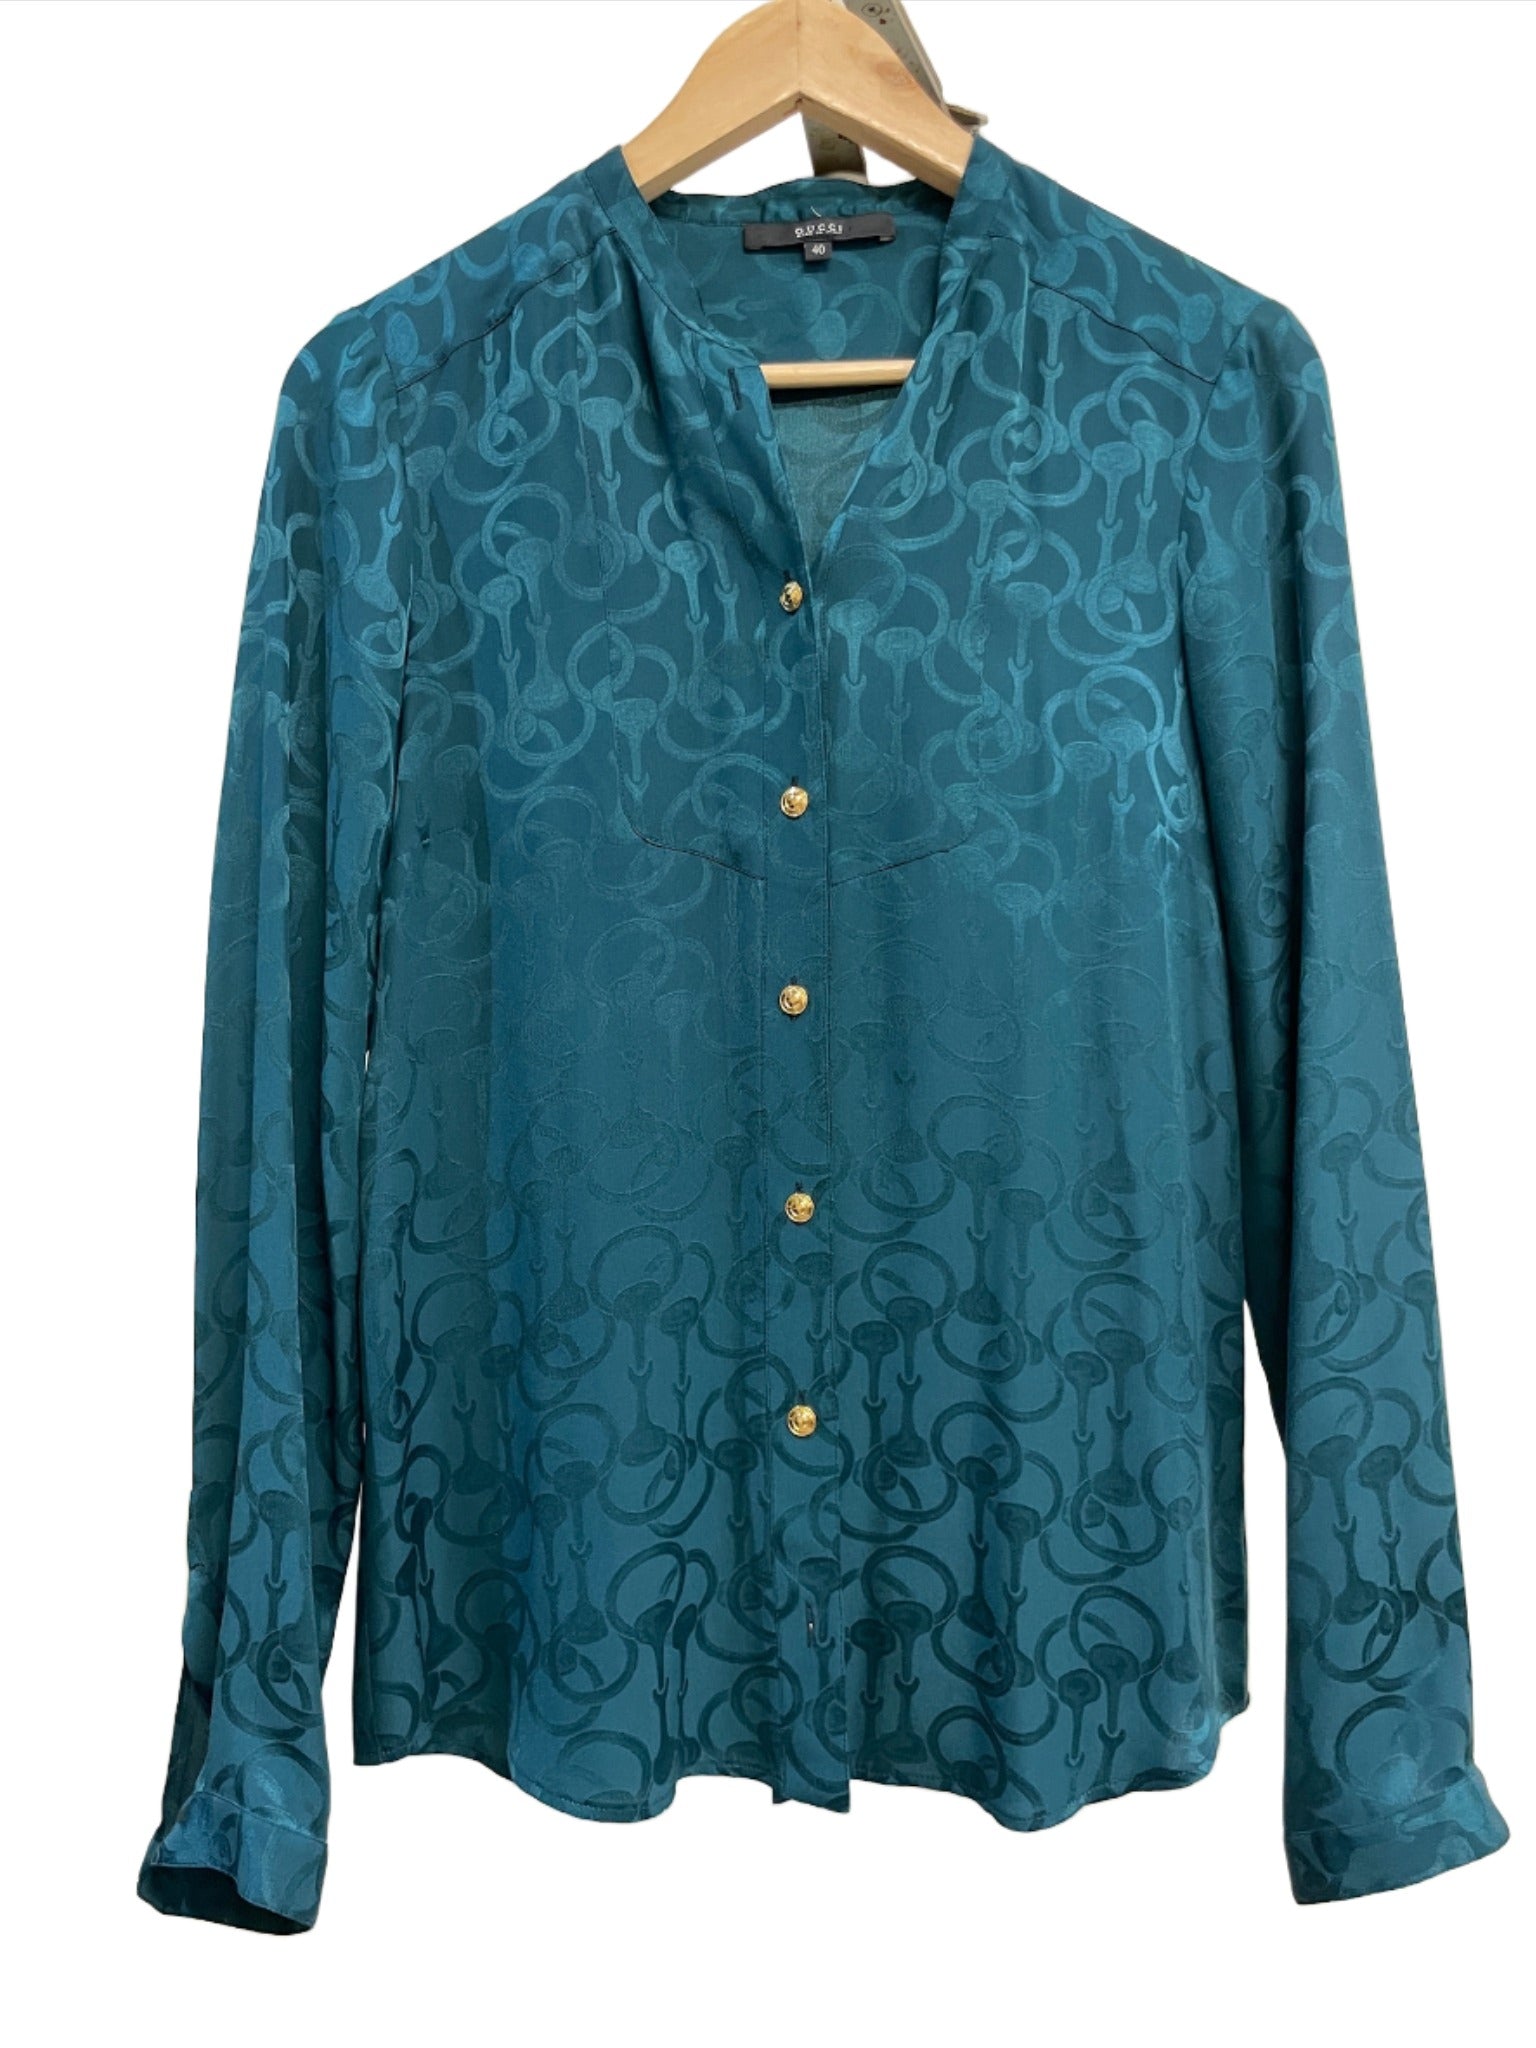 Gucci Teal Blouse